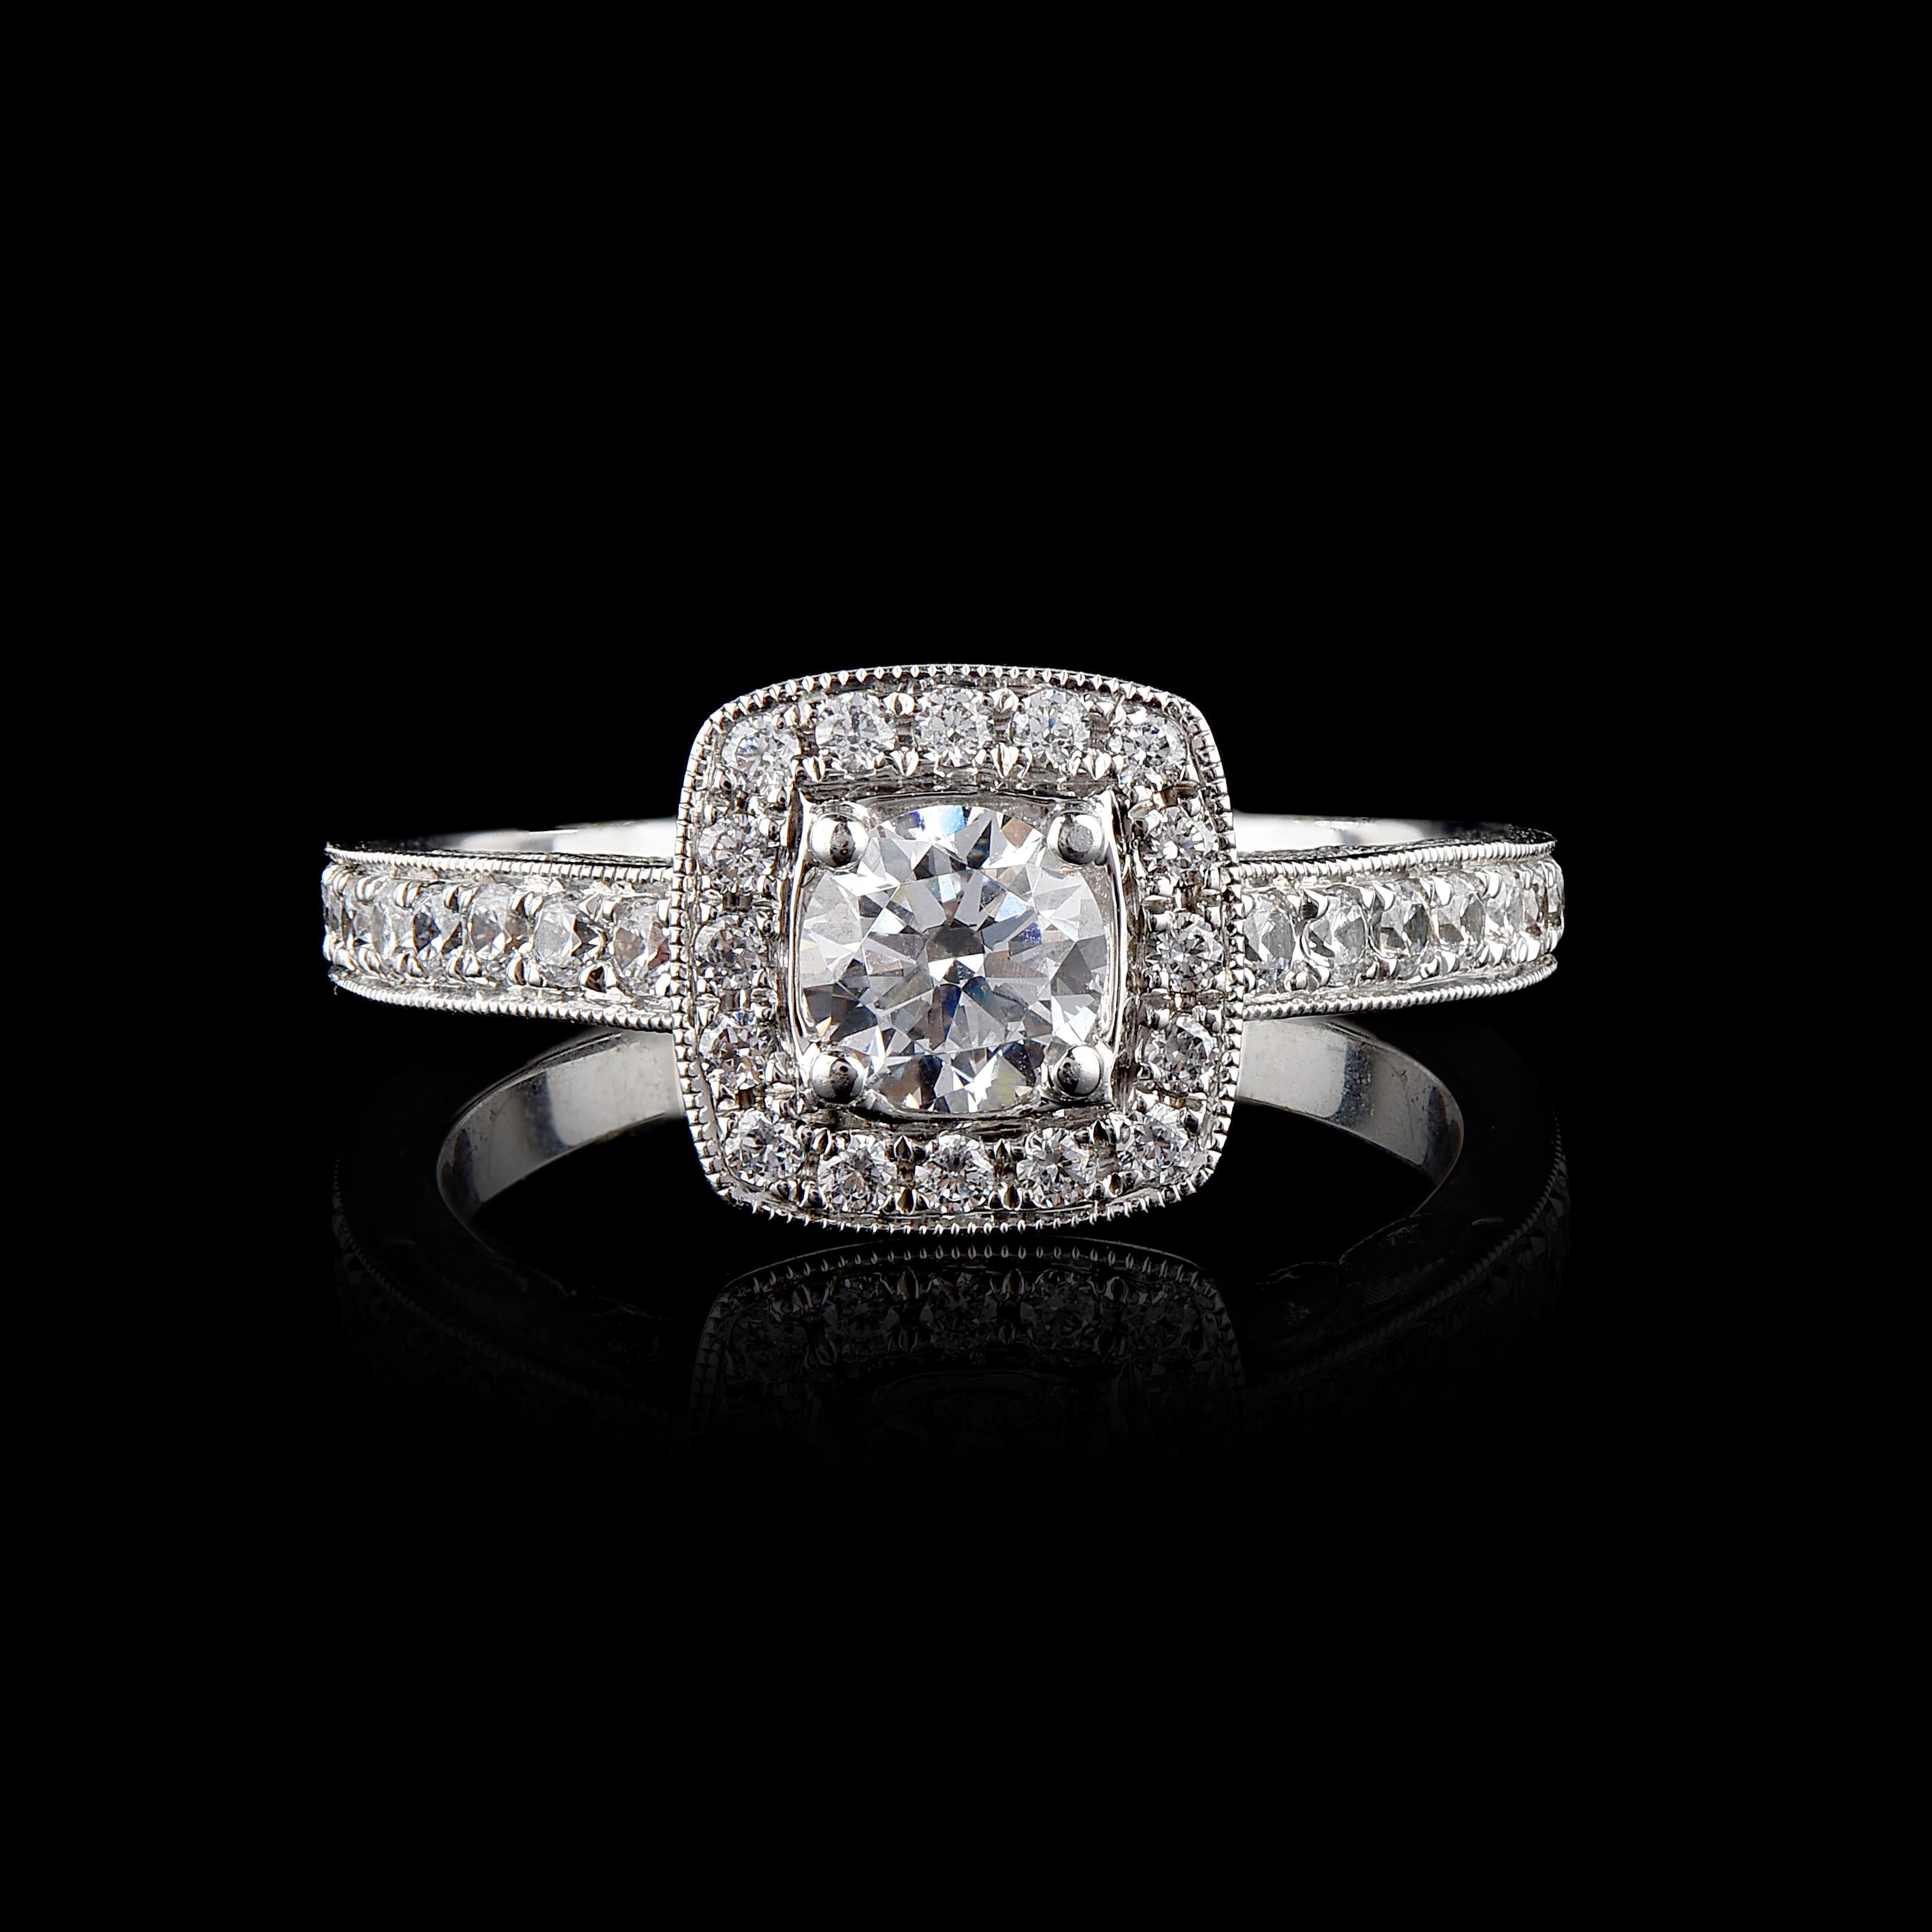 This diamond frame Wide Band Ring is expertly crafted in 18 Karat White Gold and features 0.45 ct centre stone and 0.55 ct diamond frame and shoulders set in flush, prong and micro prong setting. The diamond are natural, not treated and shines